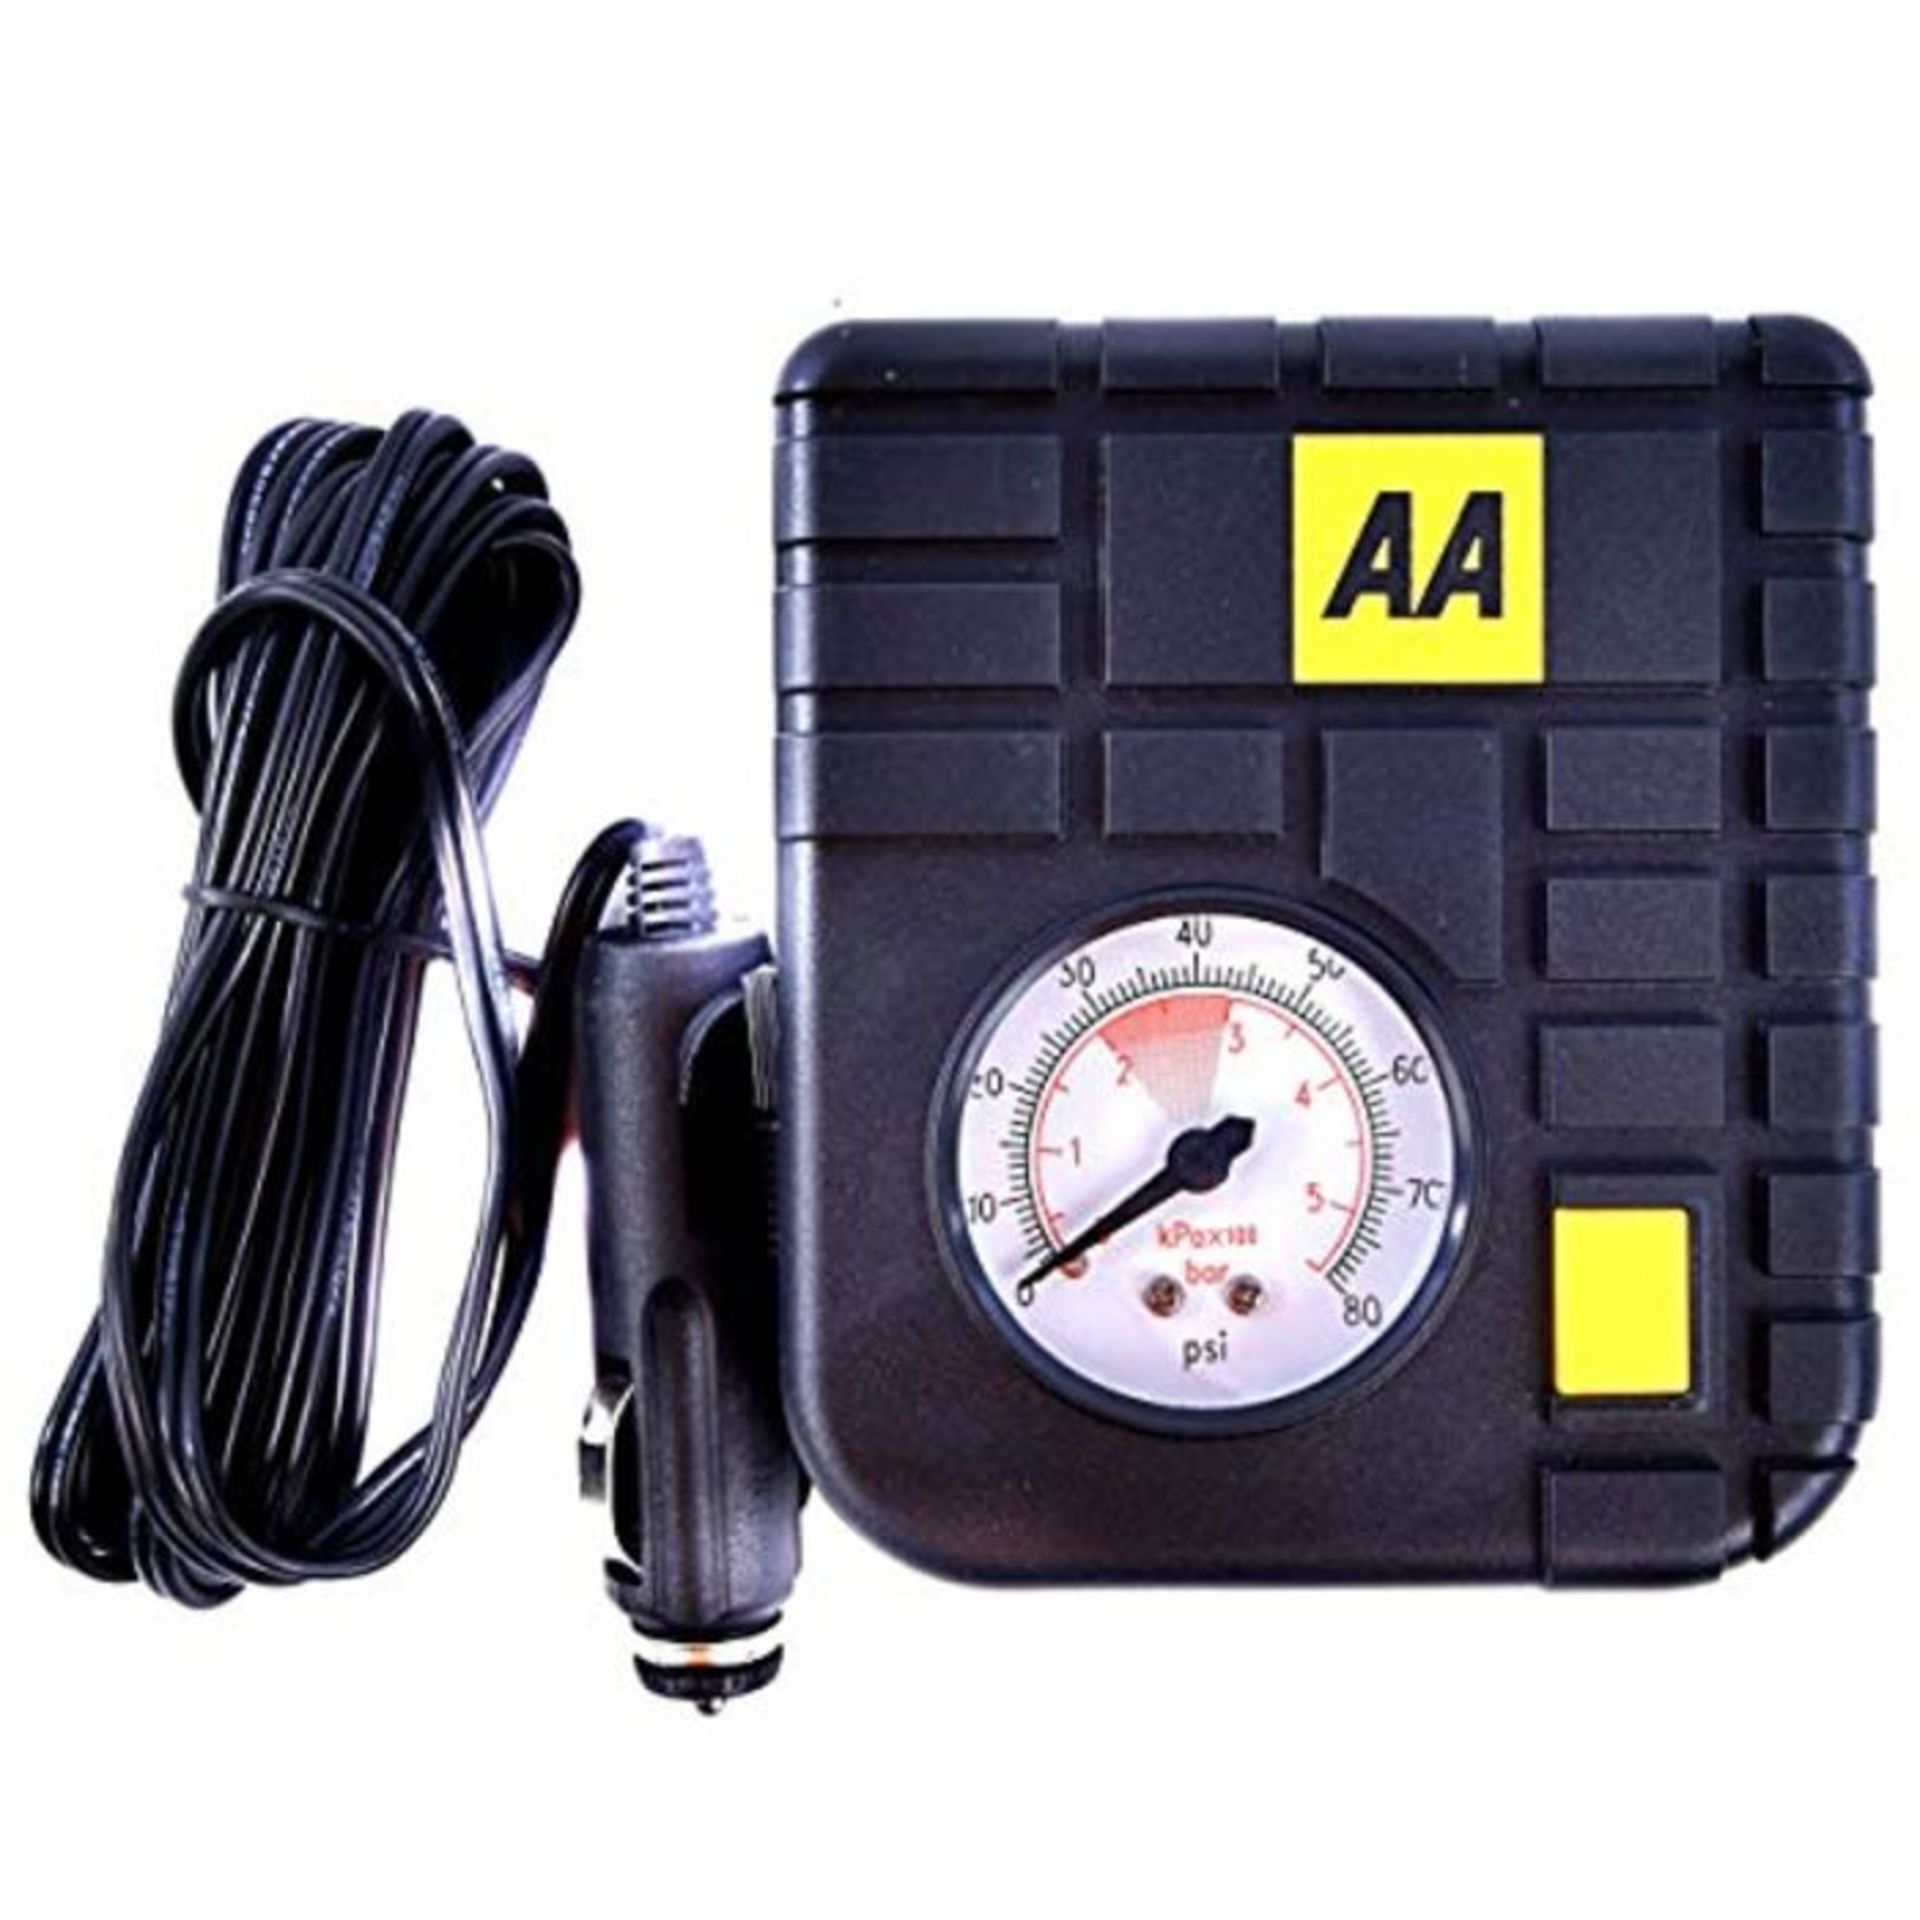 AA Car Essentials 12V Compact Tyre Inflator AA5007  For Cars Vans Motorbikes Vehicl